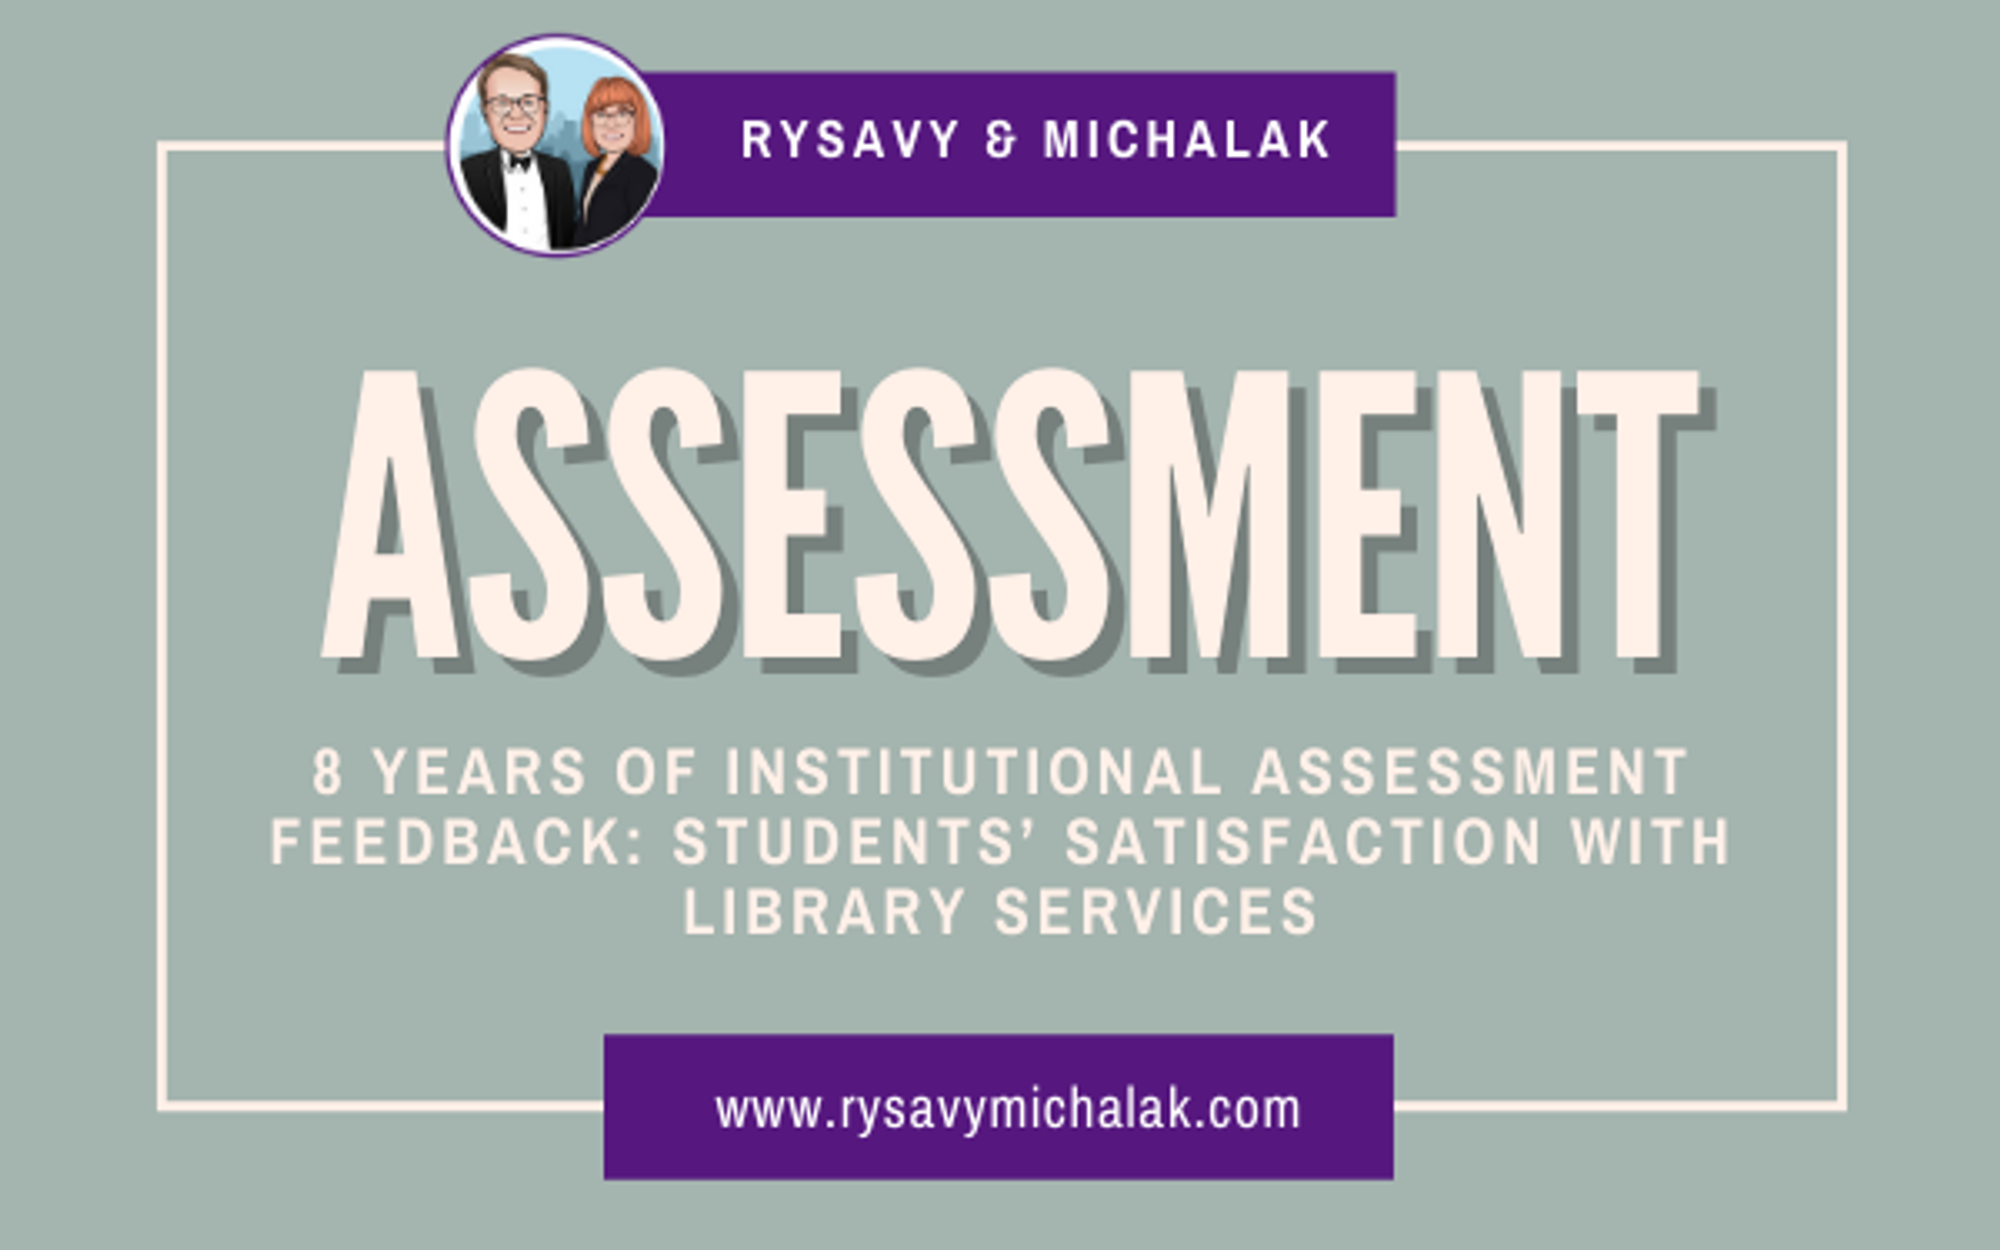 8 Years of institutional assessment feedback: studentsâ€™ satisfaction with library services